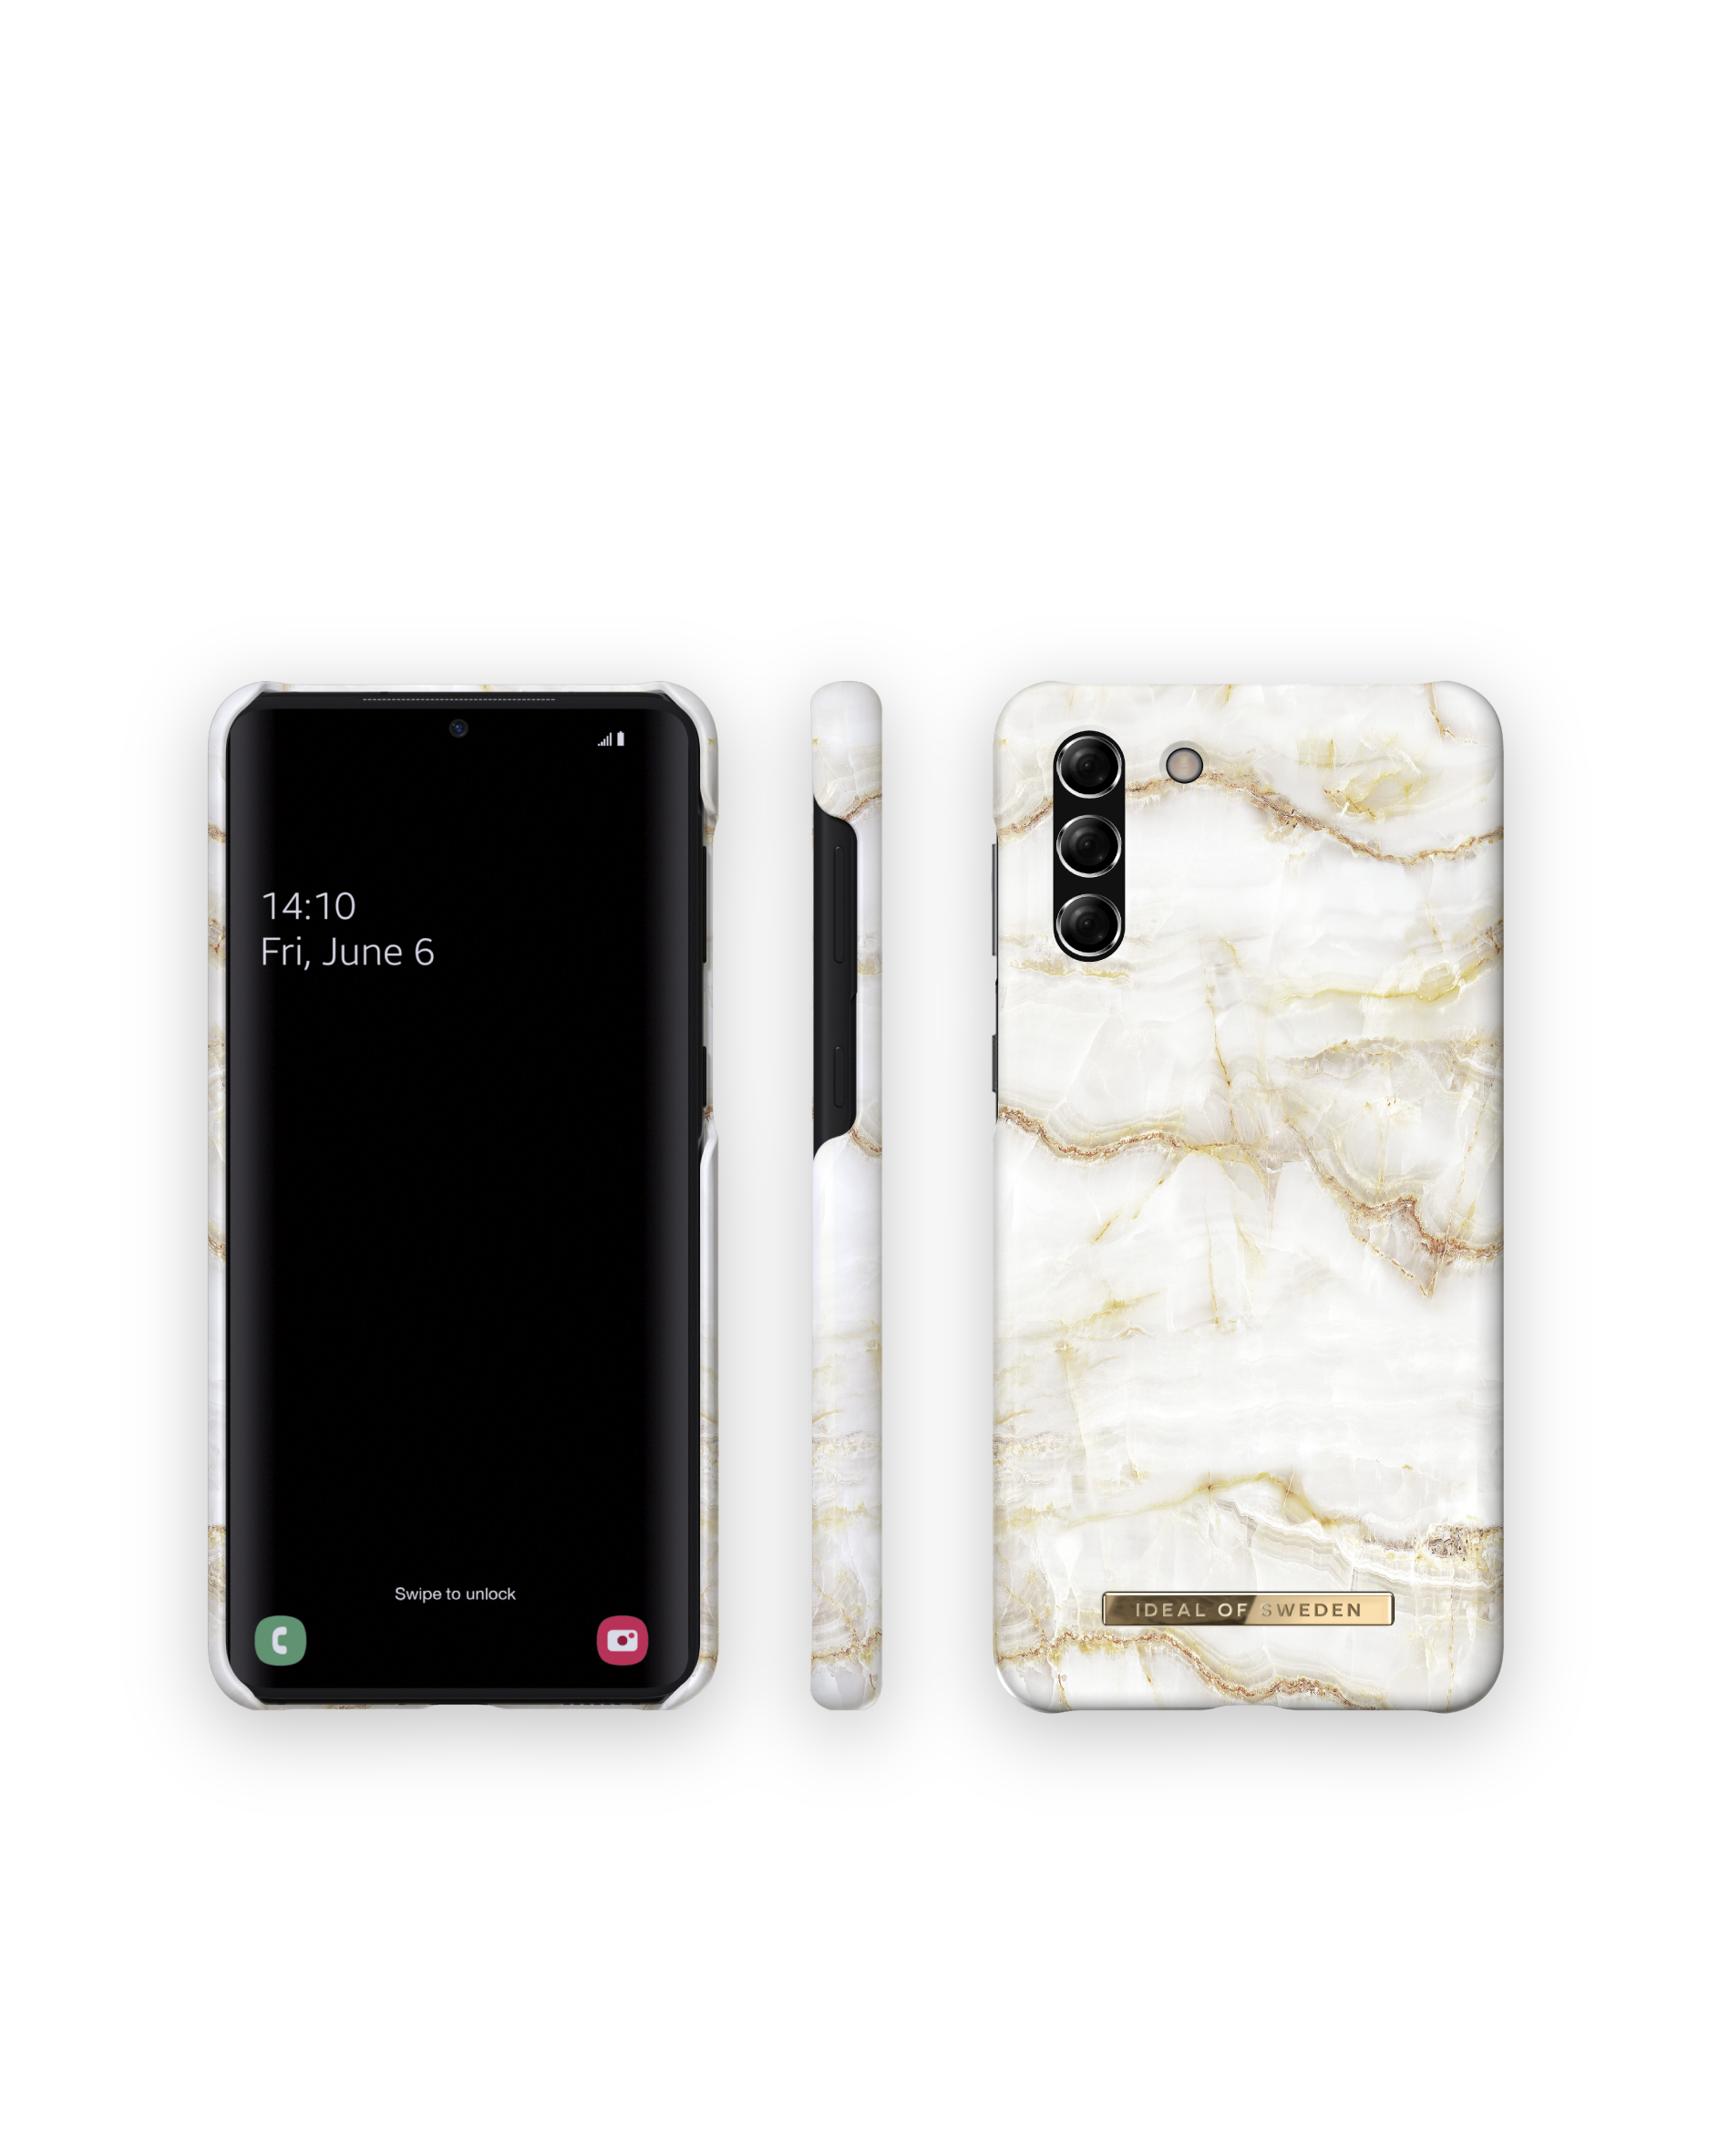 IDEAL OF SWEDEN IDFCSS20-S21P-194, Backcover, S21+, Marble Golden Samsung, Galaxy Pearl